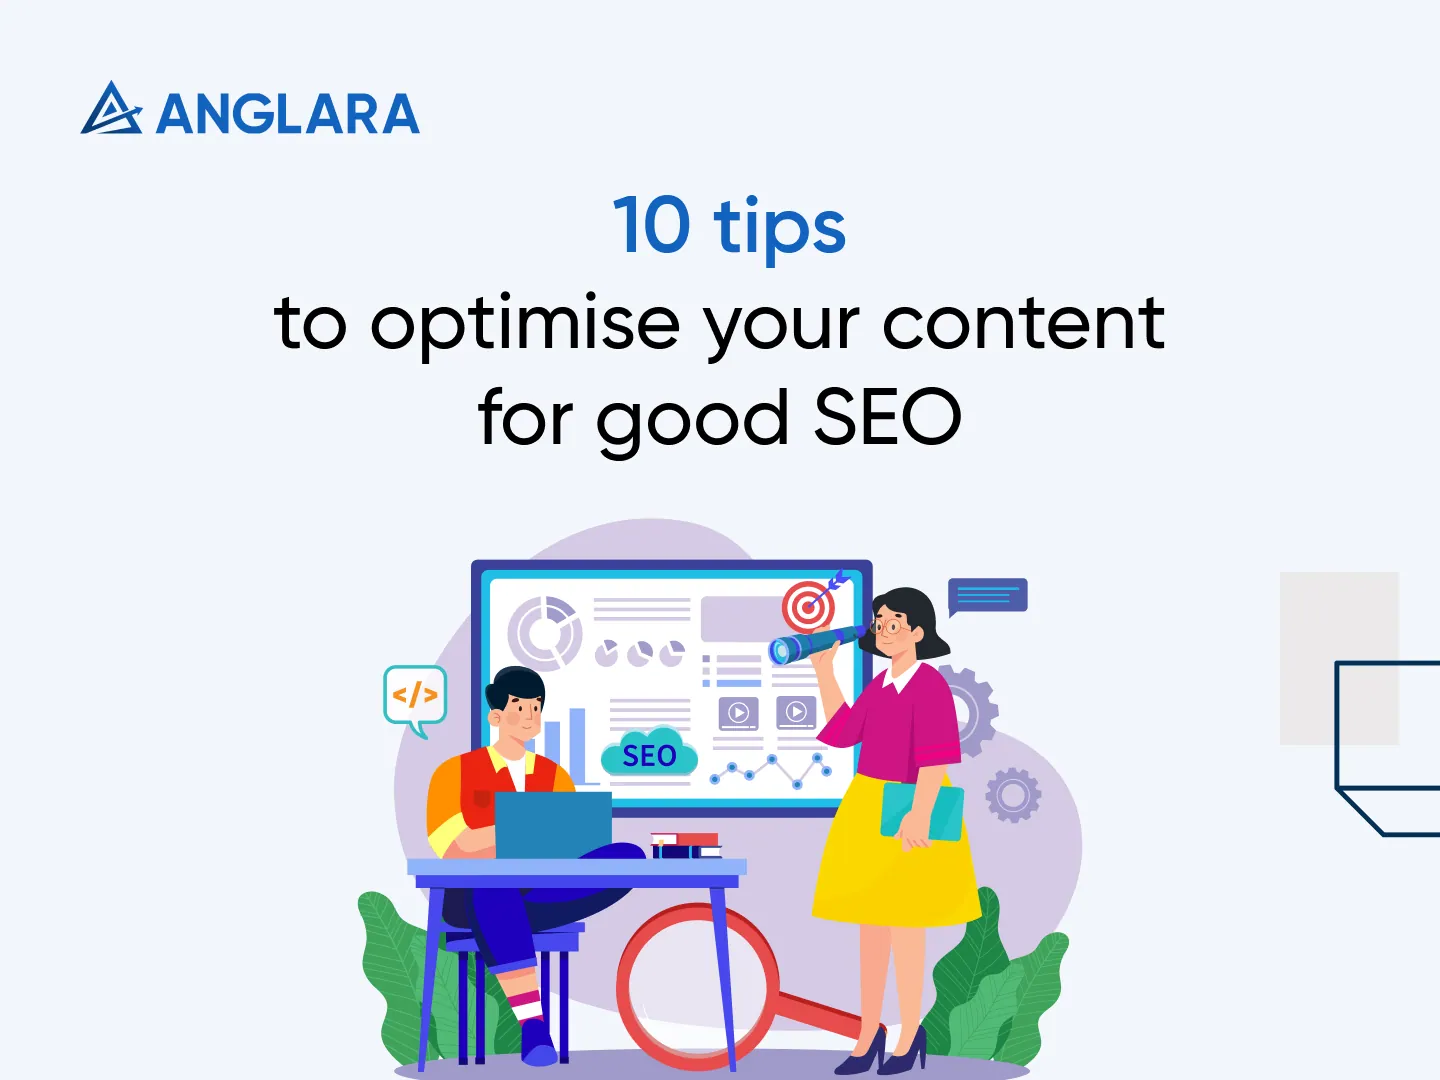 Tips to optimise your content for good SEO